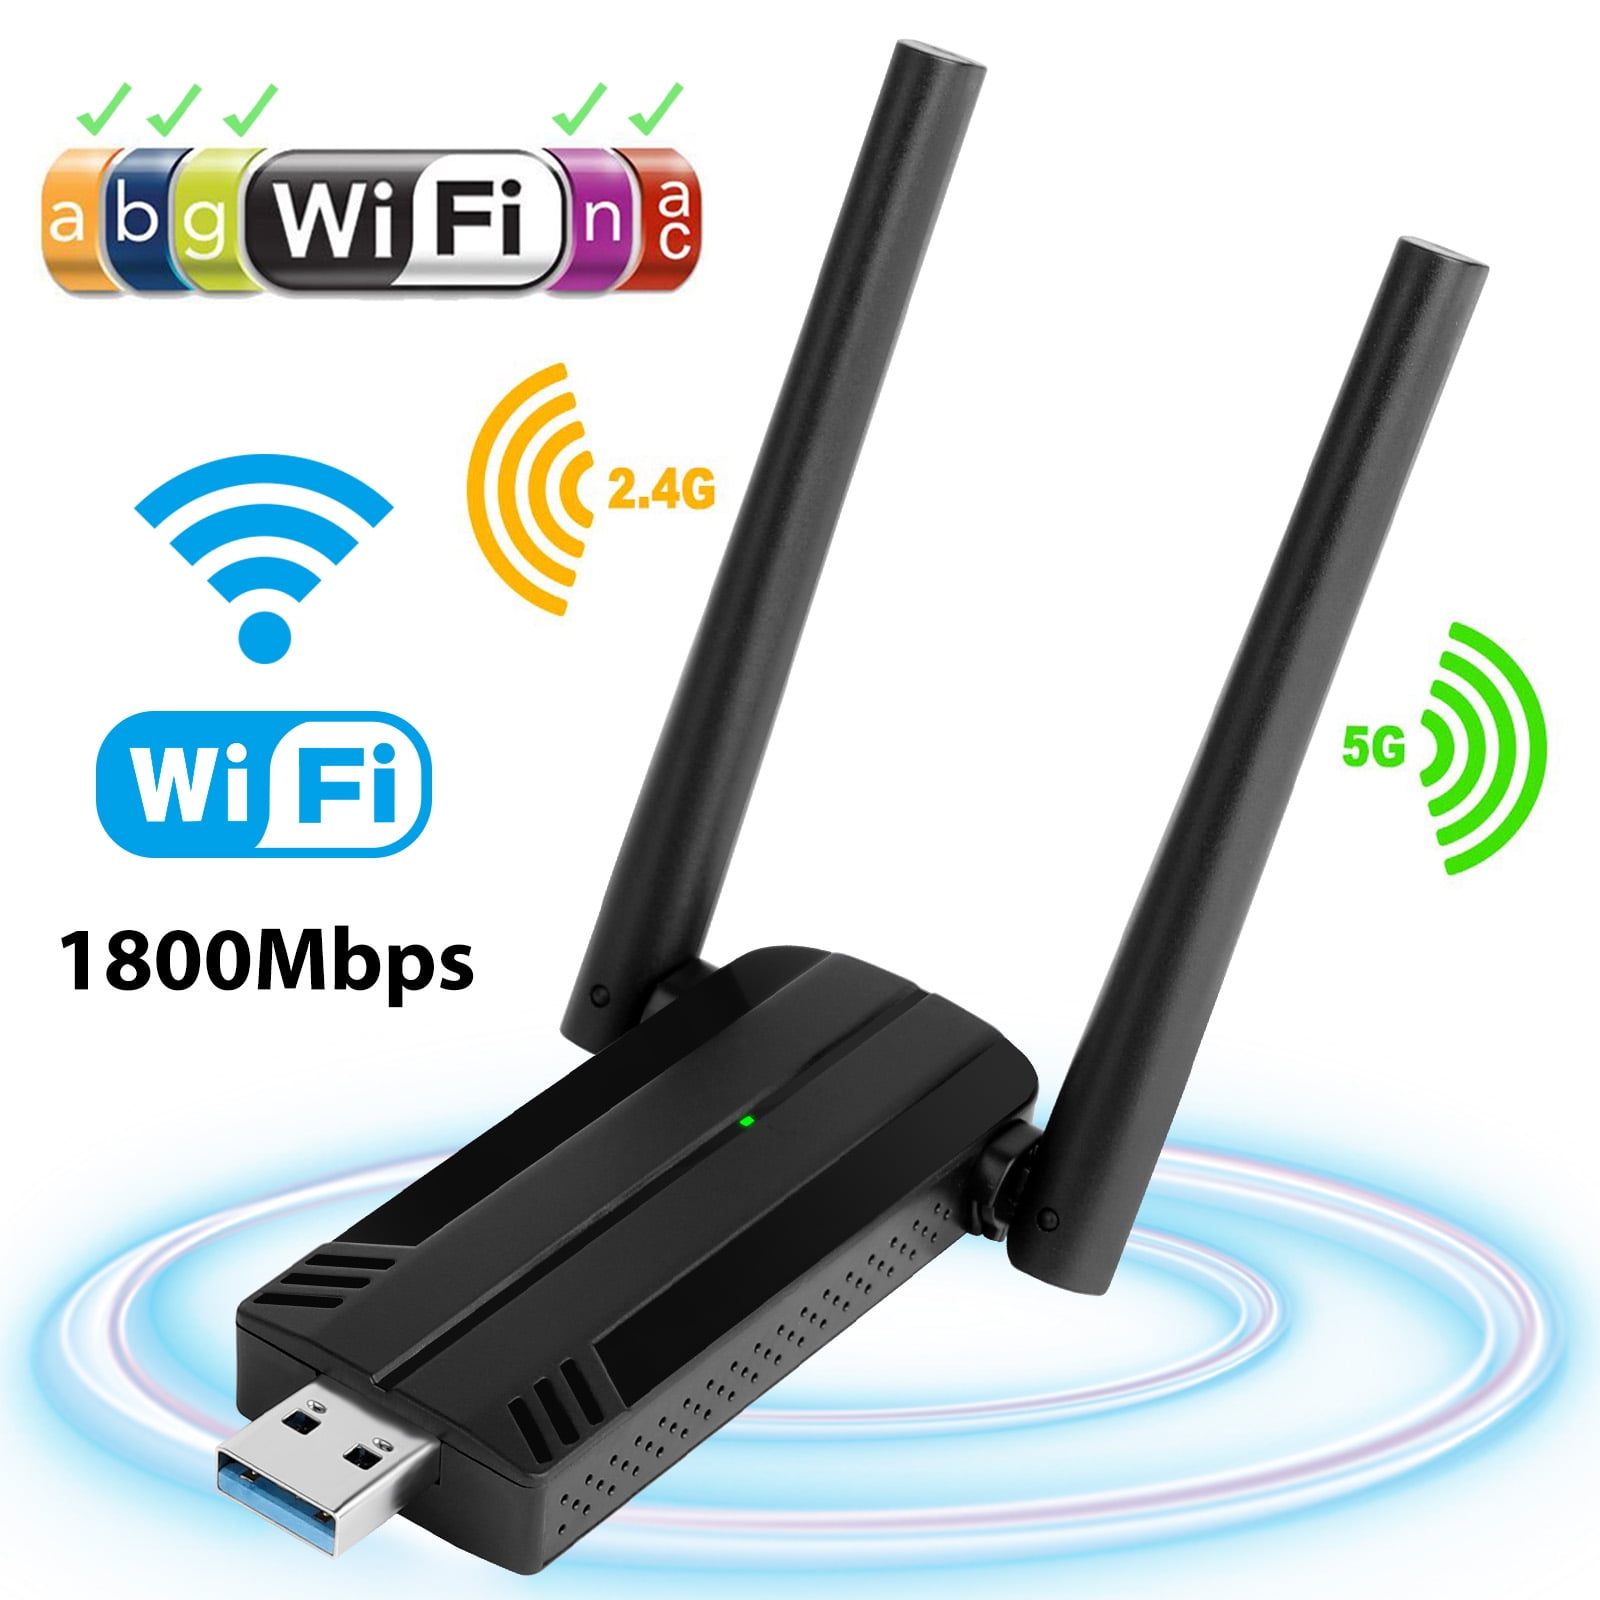 USB WiFi Adapter for PC, EEEkit 1800Mbps Dual Band 2.4GHz/5GHz Fast USB3.0 High Gain 2dBi Antenna WiFi Dongle Wireless Network Adapter for Desktop Laptop Supports Windows Mac - Walmart.com